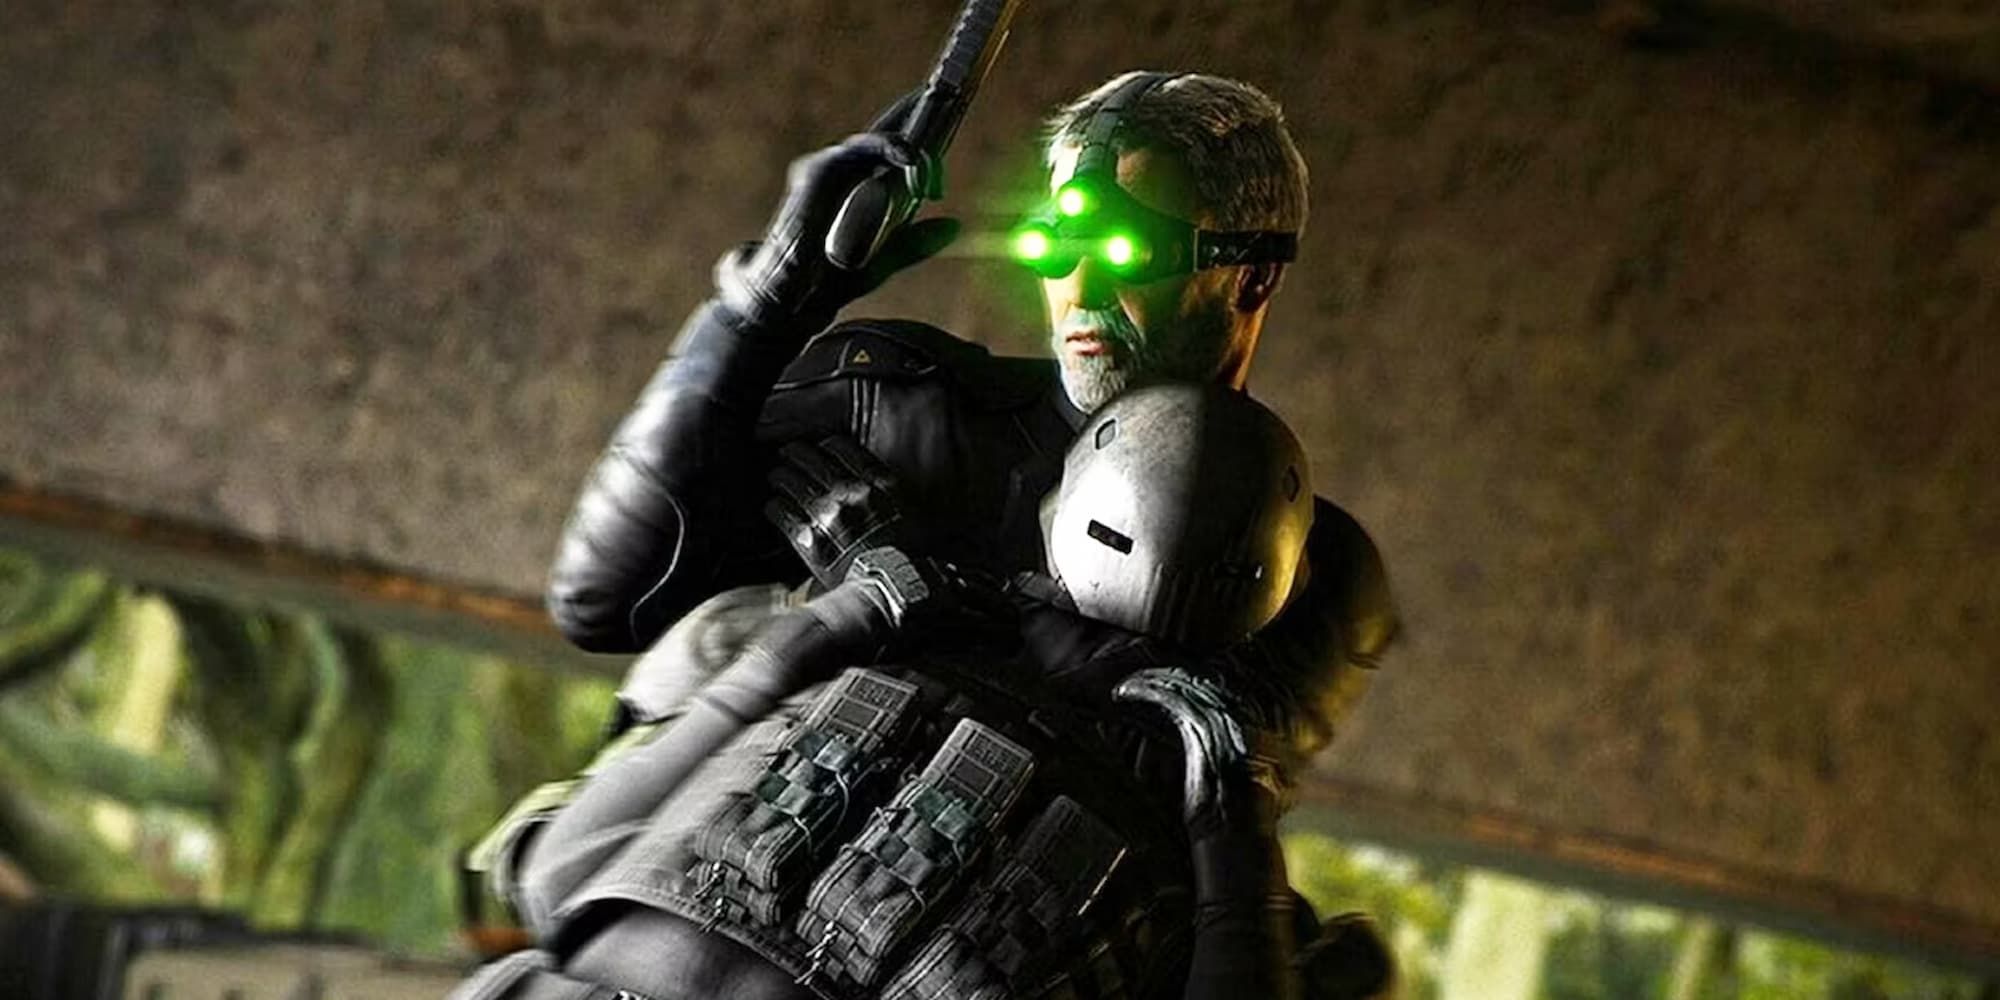 The Splinter Cell remake features a rewritten story for modern-day